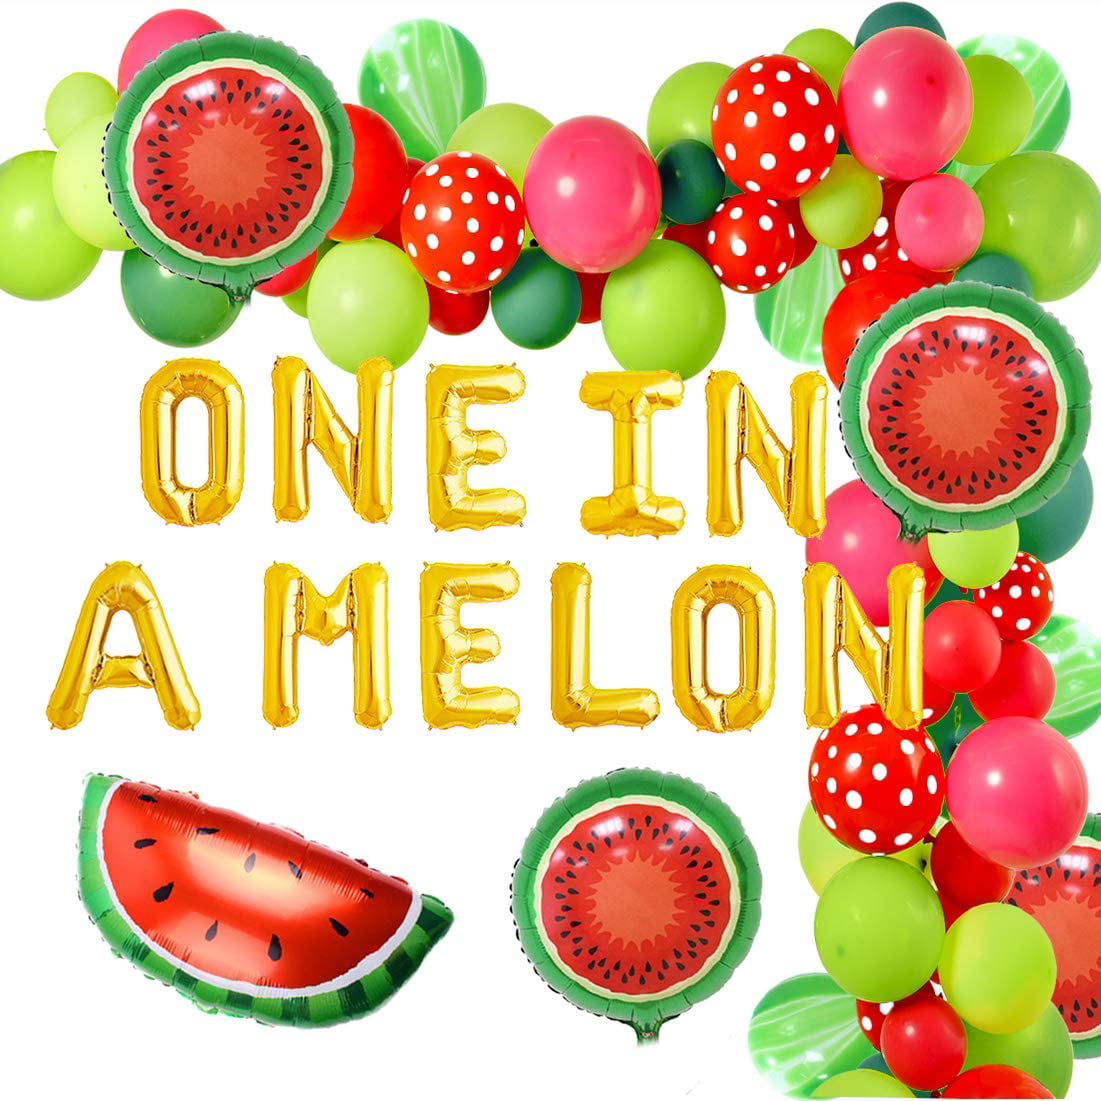 WERNNSAI Watermelon Birthday Party Supplies One in a Melon Party Decor for Girls 1st Birthday Banner Balloons Tablecloth Plates Cups Napkins Spoons Forks Cutlery Bag Utensils Serves 16 Guests 153PCS